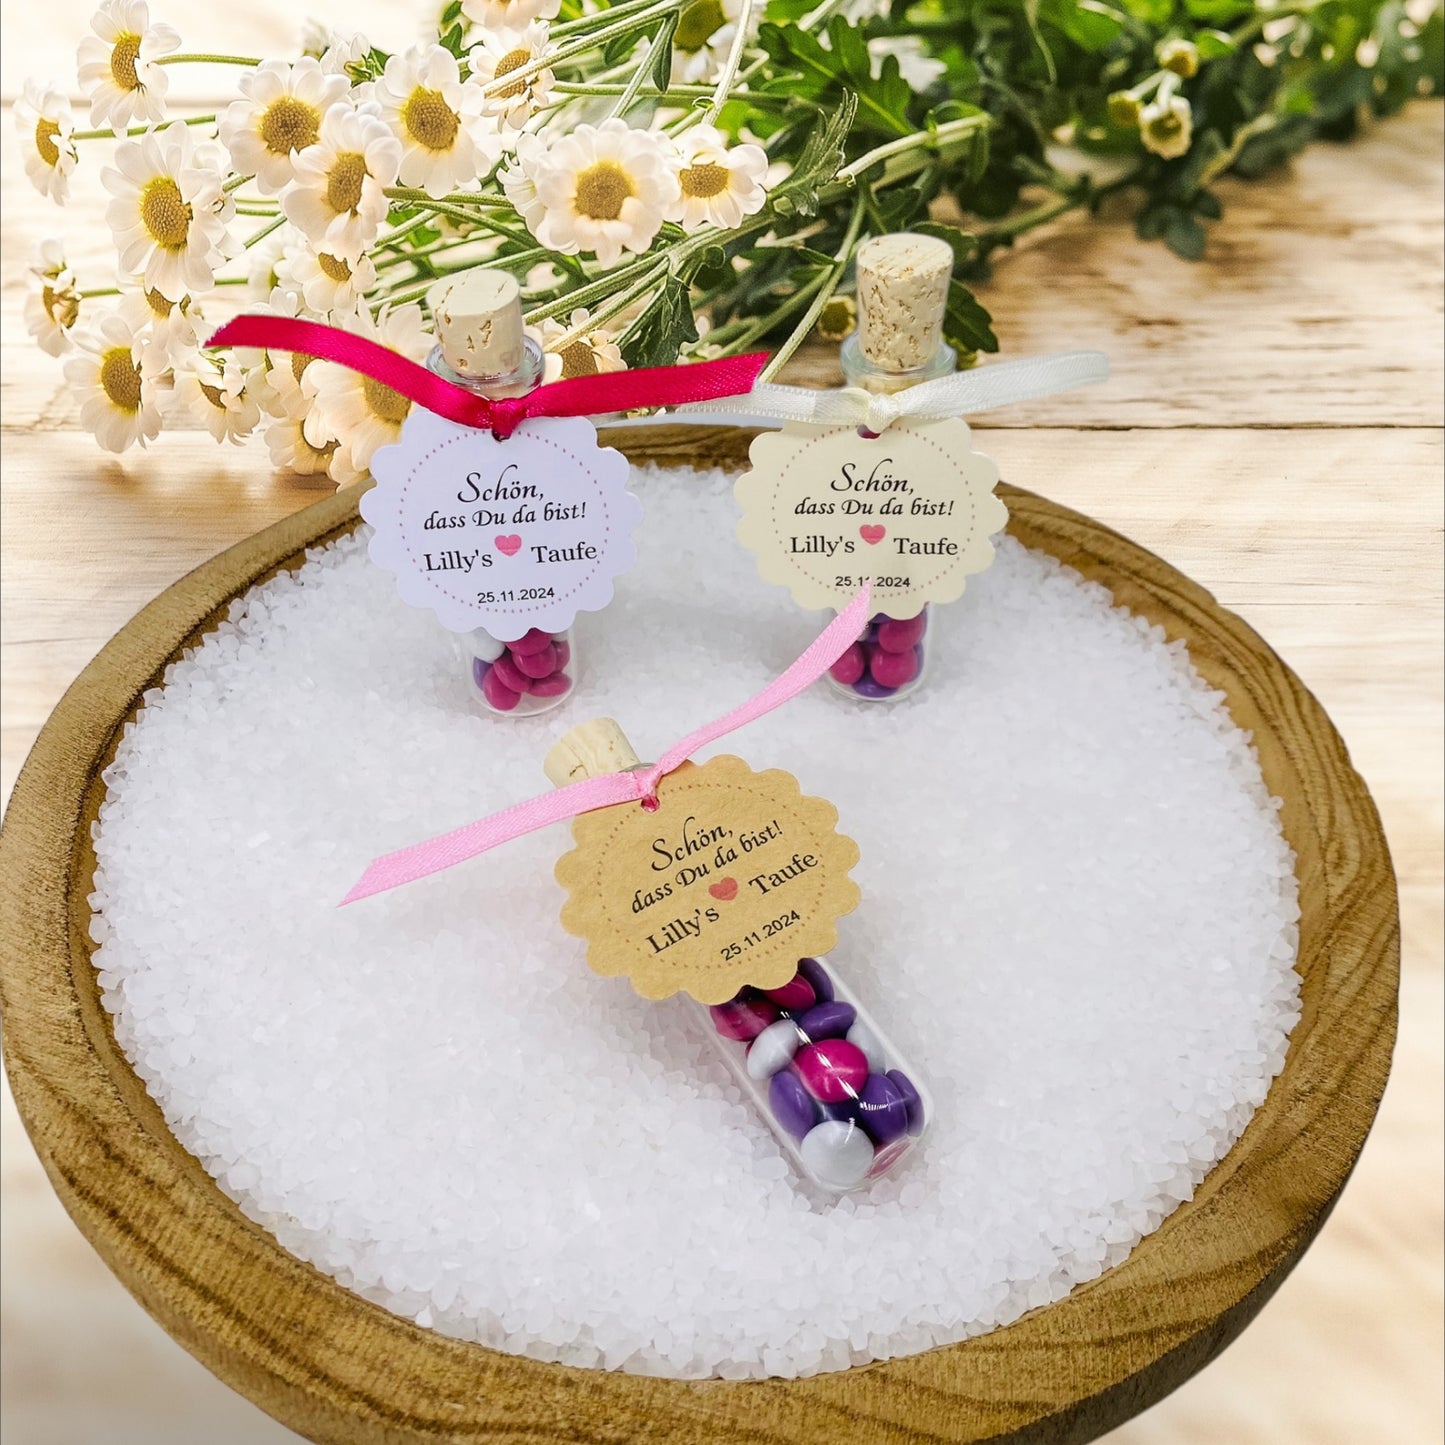 Delicate love in every detail: Personalized guest gift for girls in a ship's glass for unforgettable christening moments